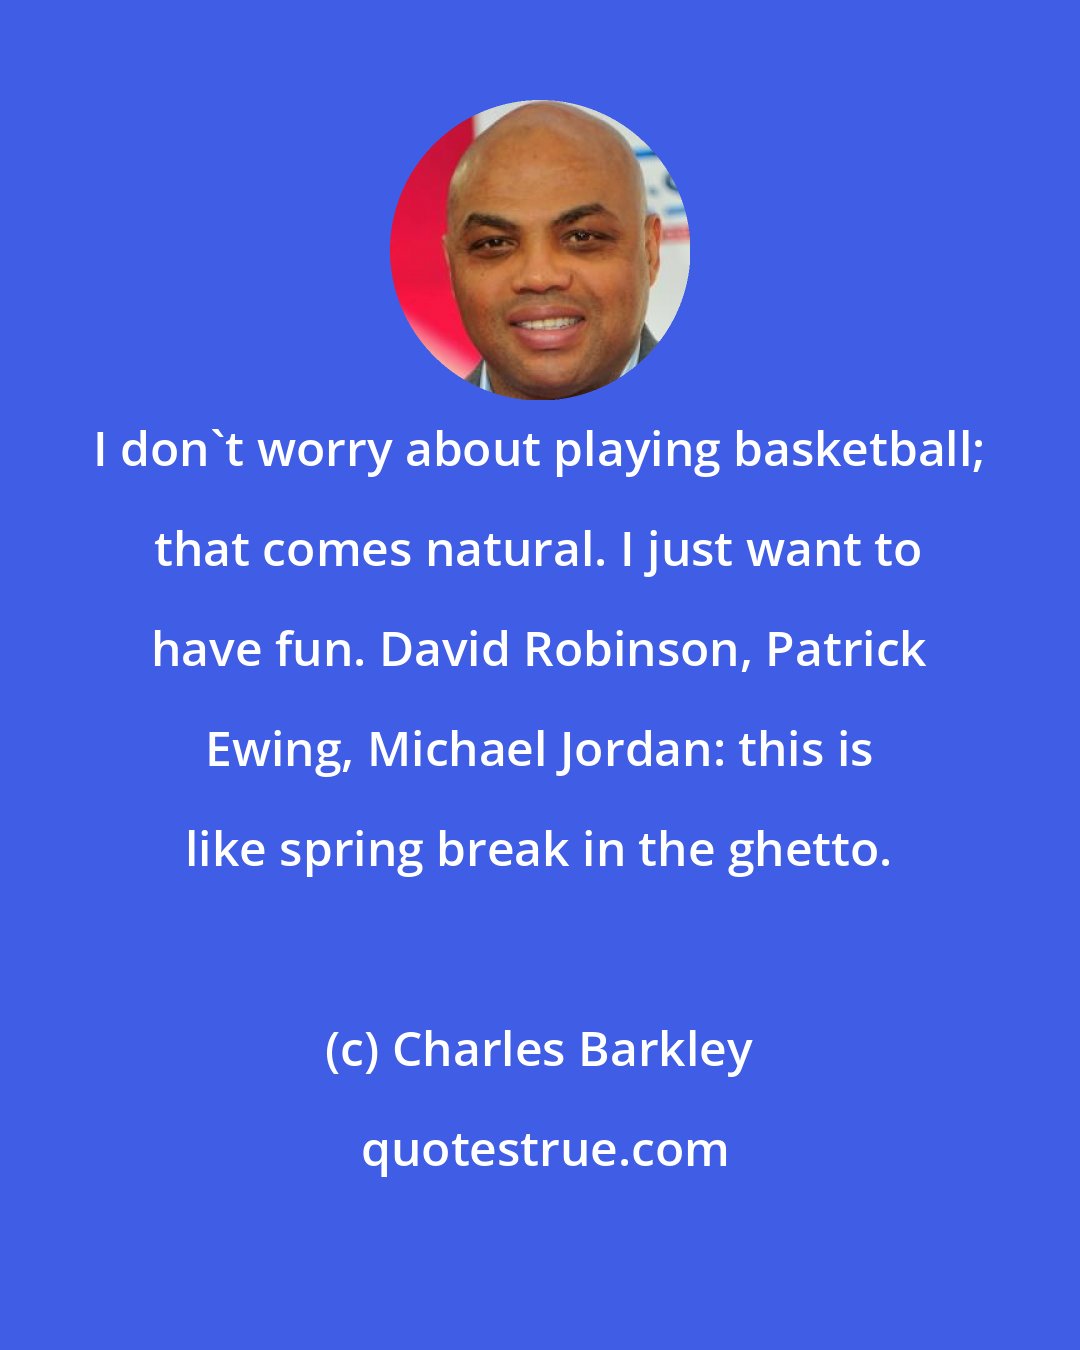 Charles Barkley: I don't worry about playing basketball; that comes natural. I just want to have fun. David Robinson, Patrick Ewing, Michael Jordan: this is like spring break in the ghetto.